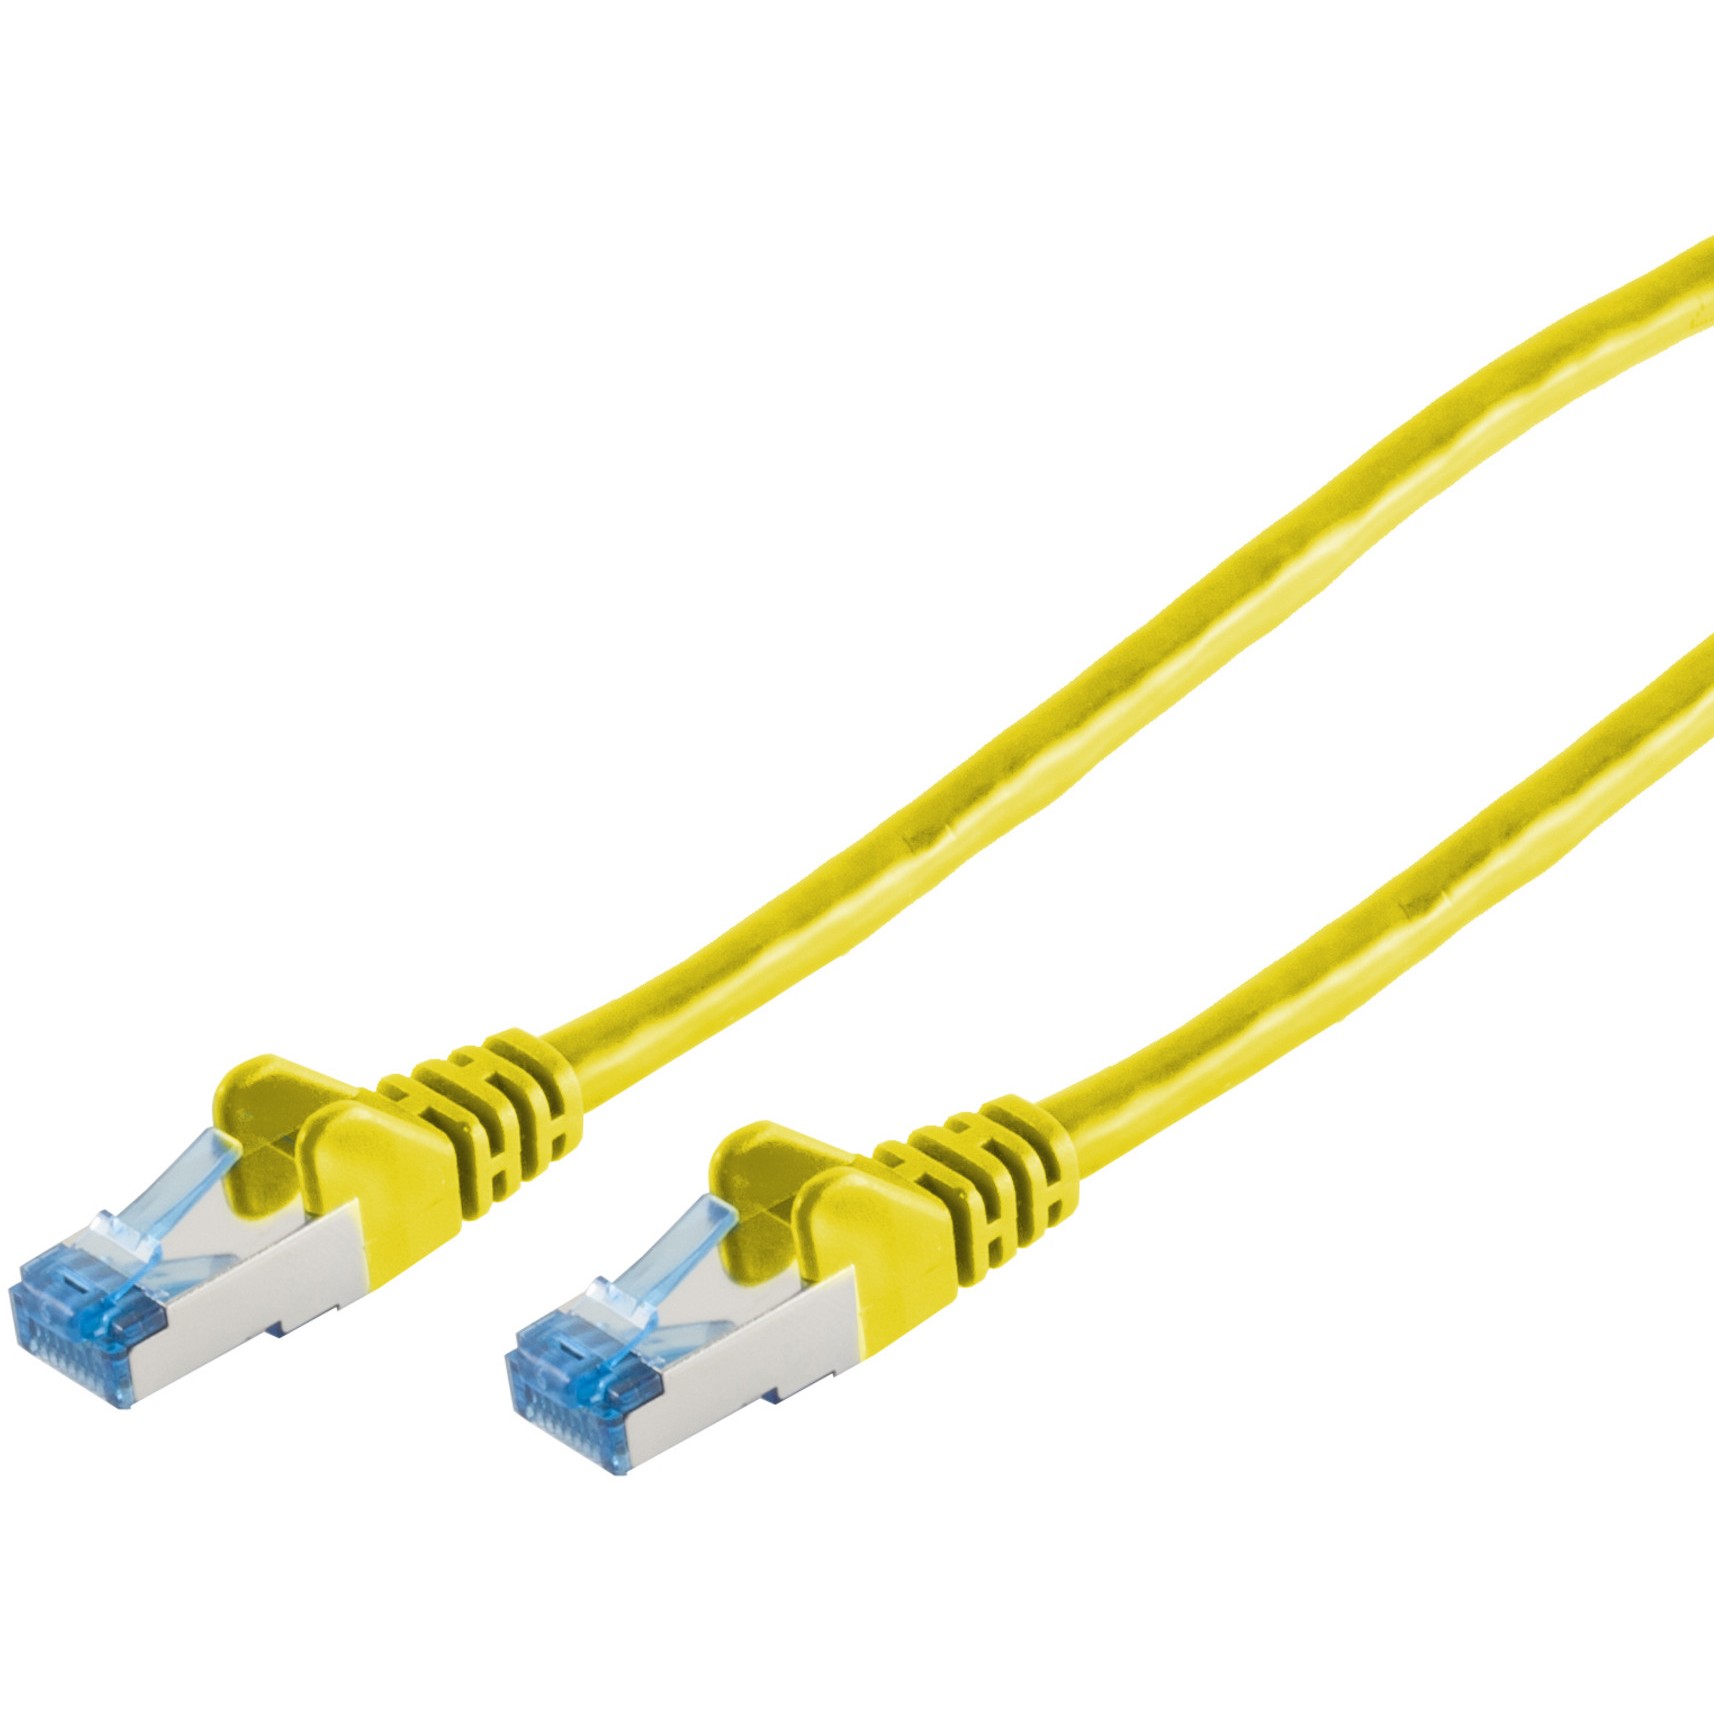 S-Conn 75715-Y networking cable - 75715-Y